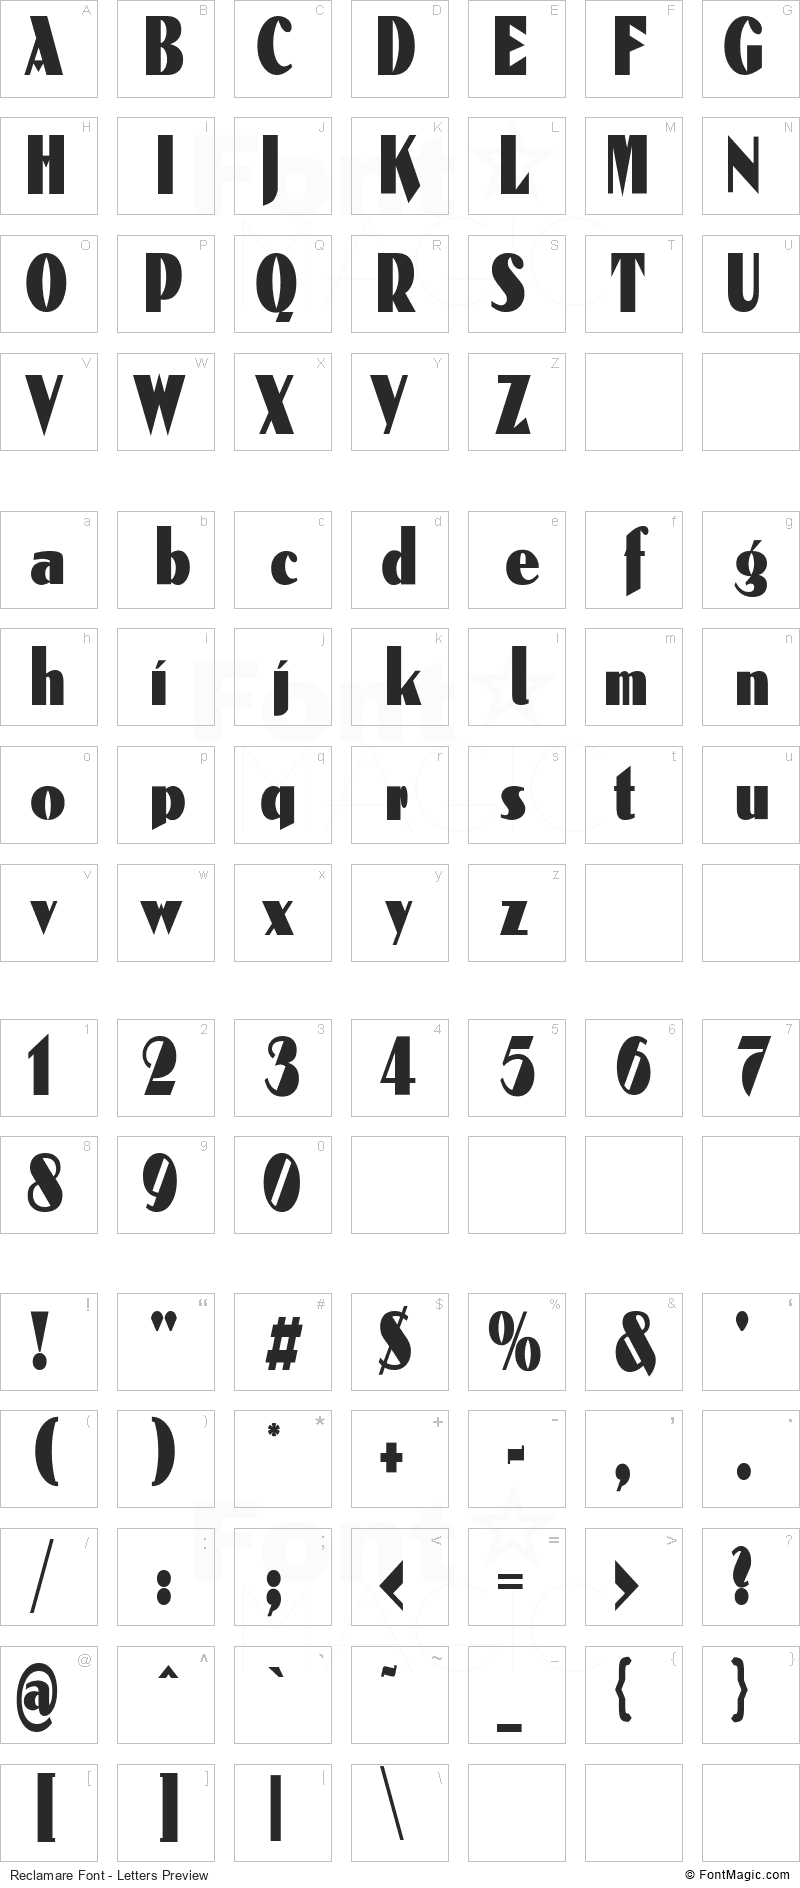 Reclamare Font - All Latters Preview Chart